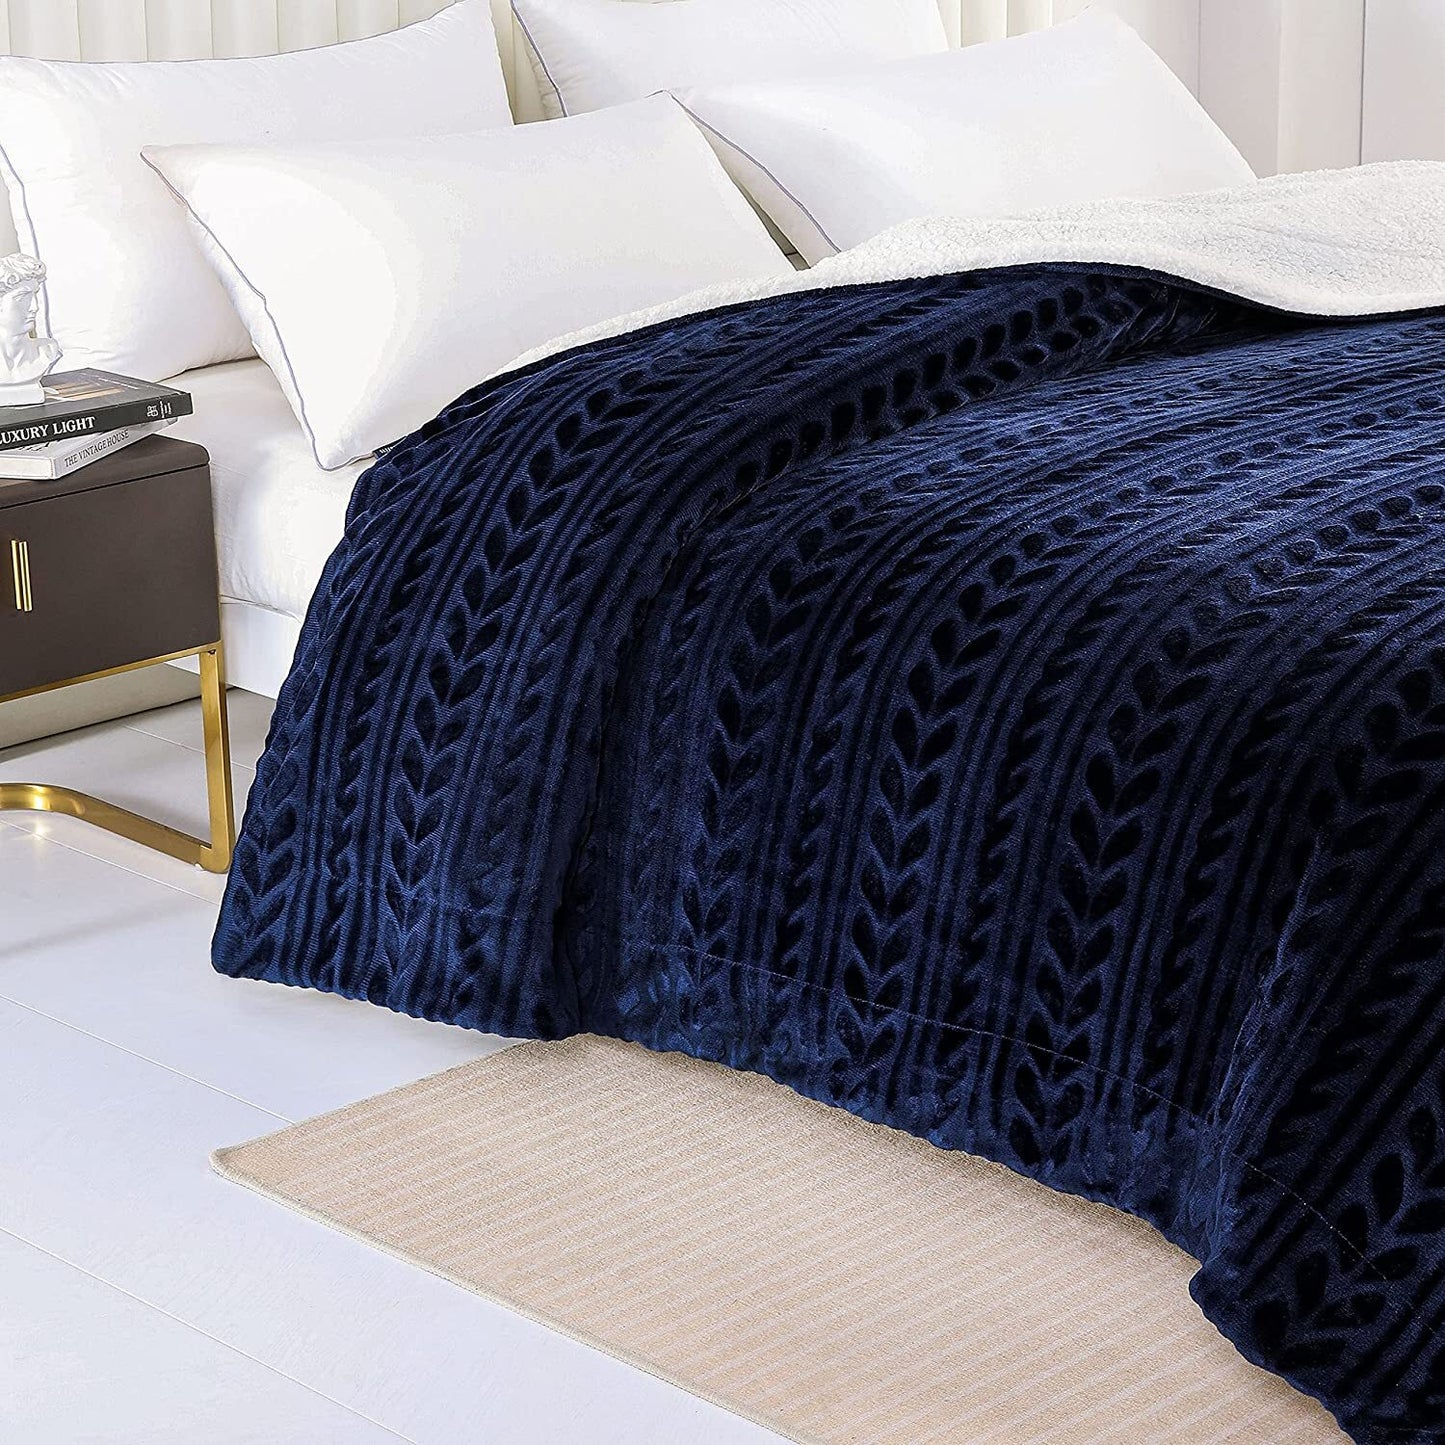 Exclusivo Mezcla Queen Size Sherpa Fleece Bed Blanket, Ultra Soft and Warm Reversible Velvet Blankets for Bed Couch Sofa 90x90 inches, Navy Blue